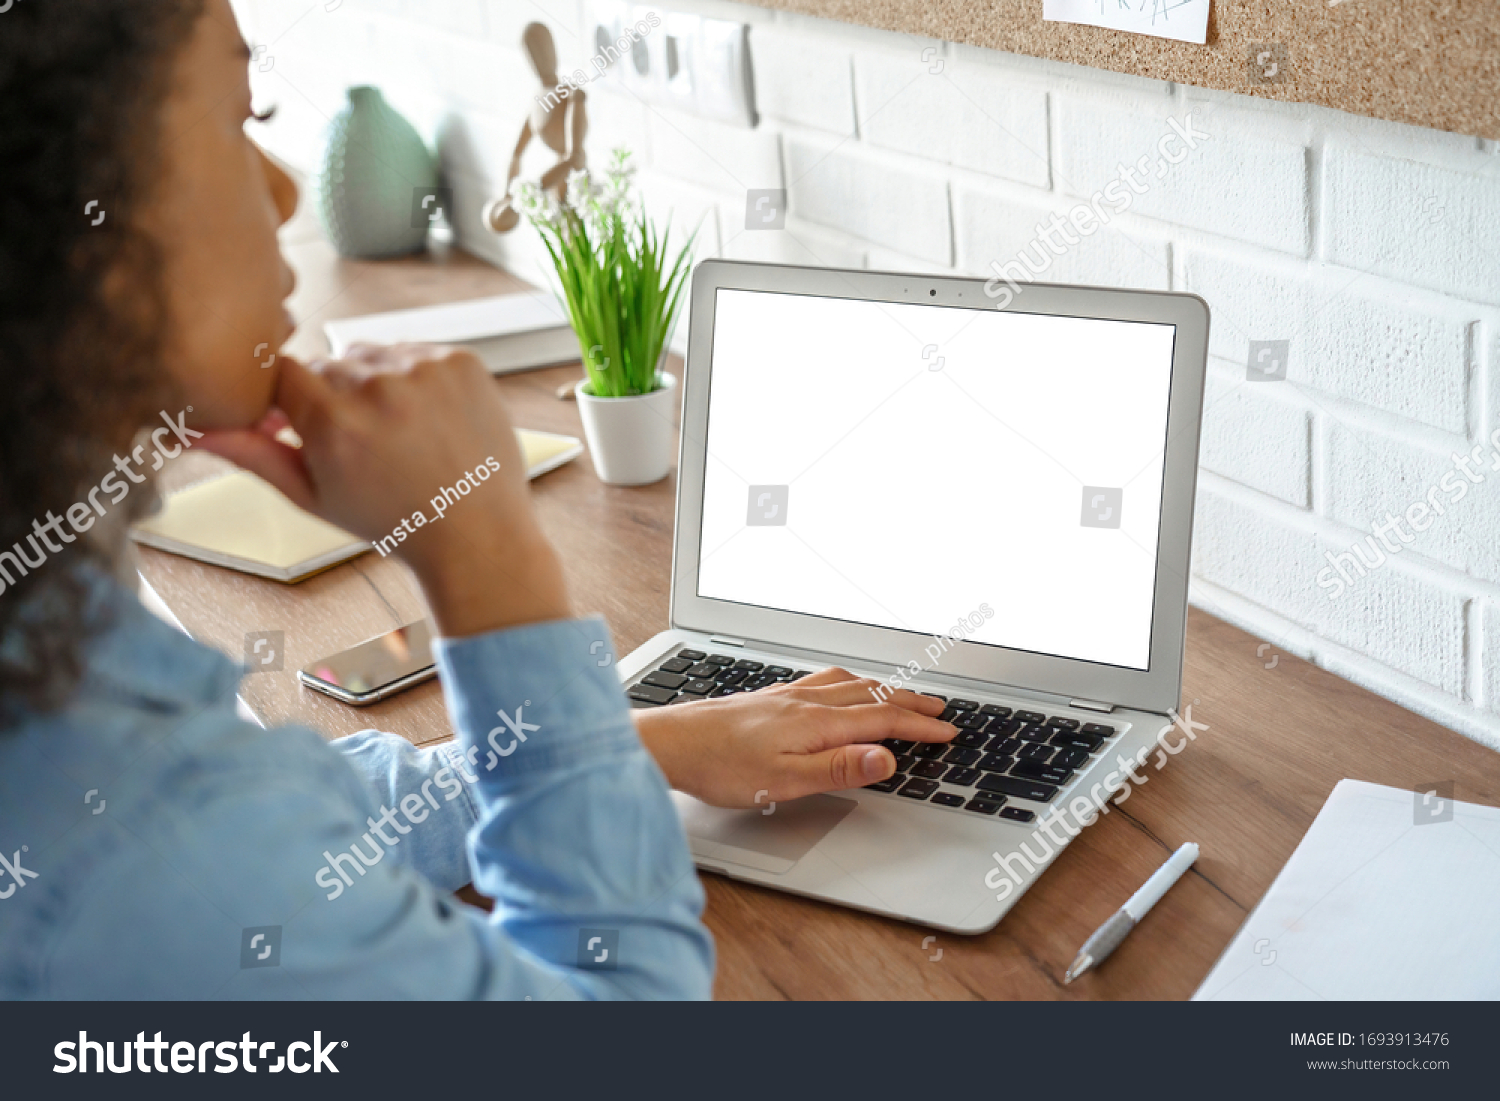 African girl student watching video course, distance e-learning, studying with online teacher by webcam. Remote education, work from home concept. Over shoulder close up laptop mock up screen view. #1693913476